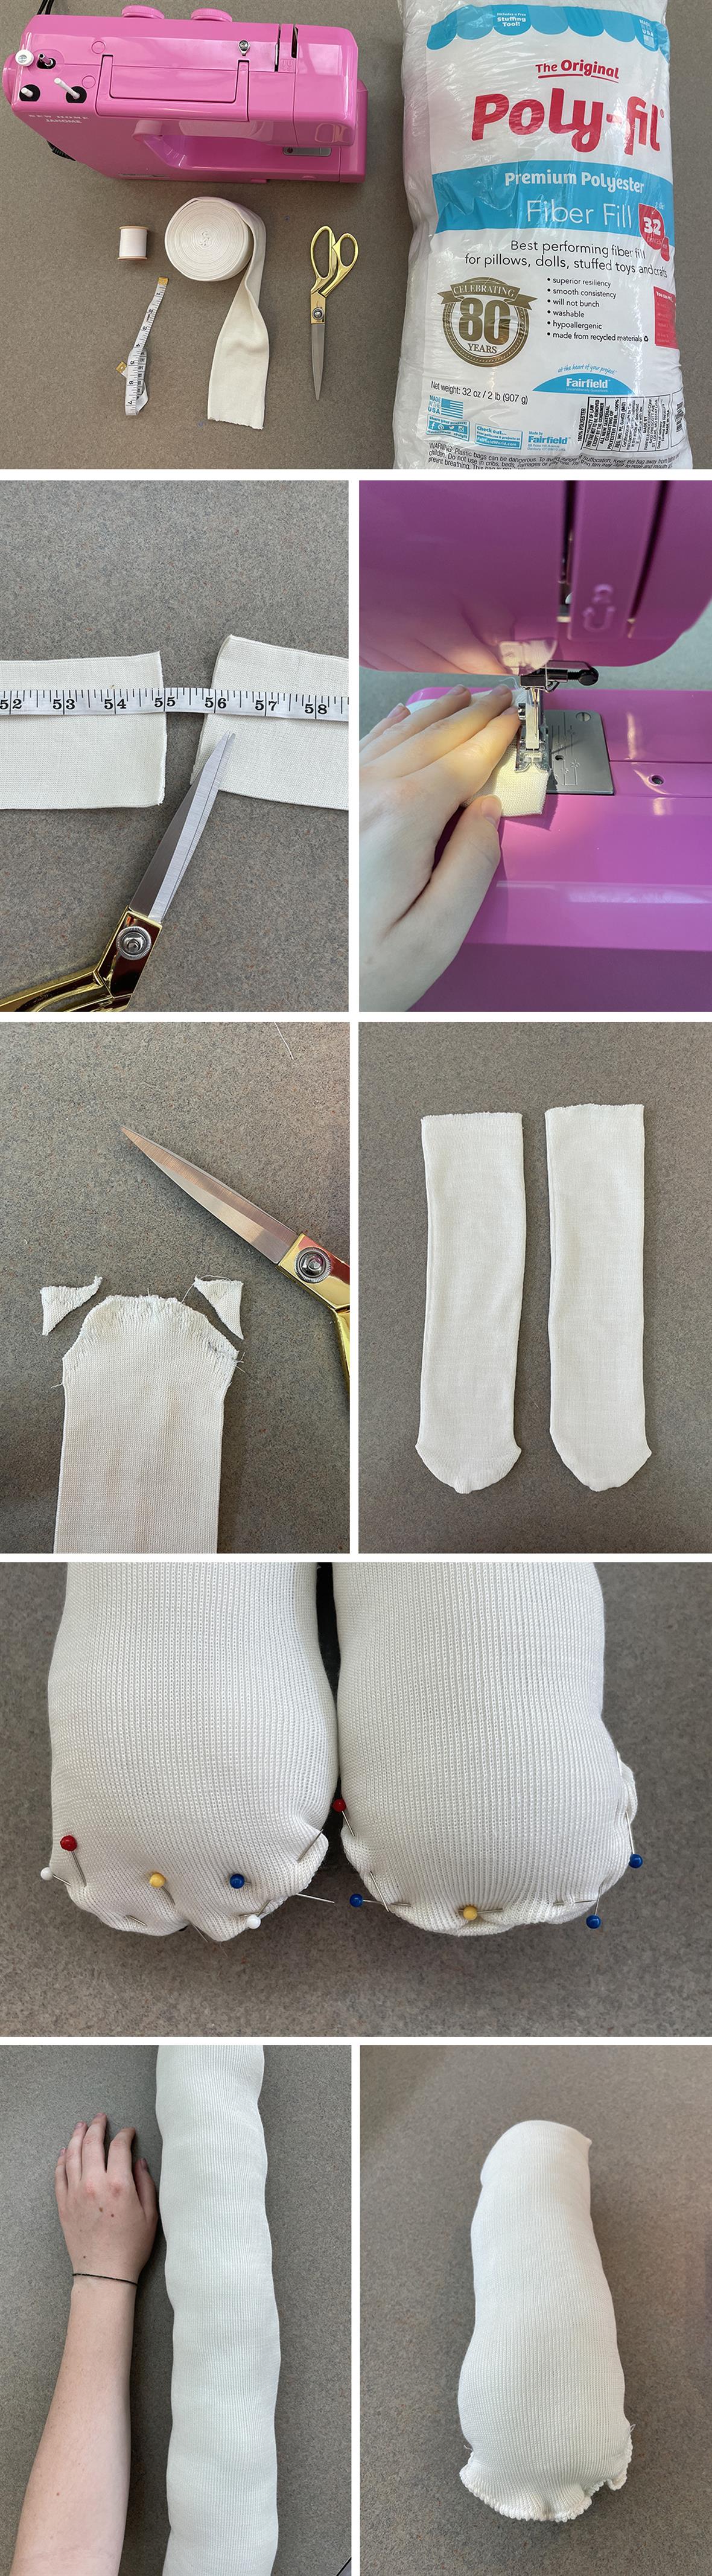 Images of the student trimming and sewing the stocking tubes, then stuffing the tubes and sewing them closed.